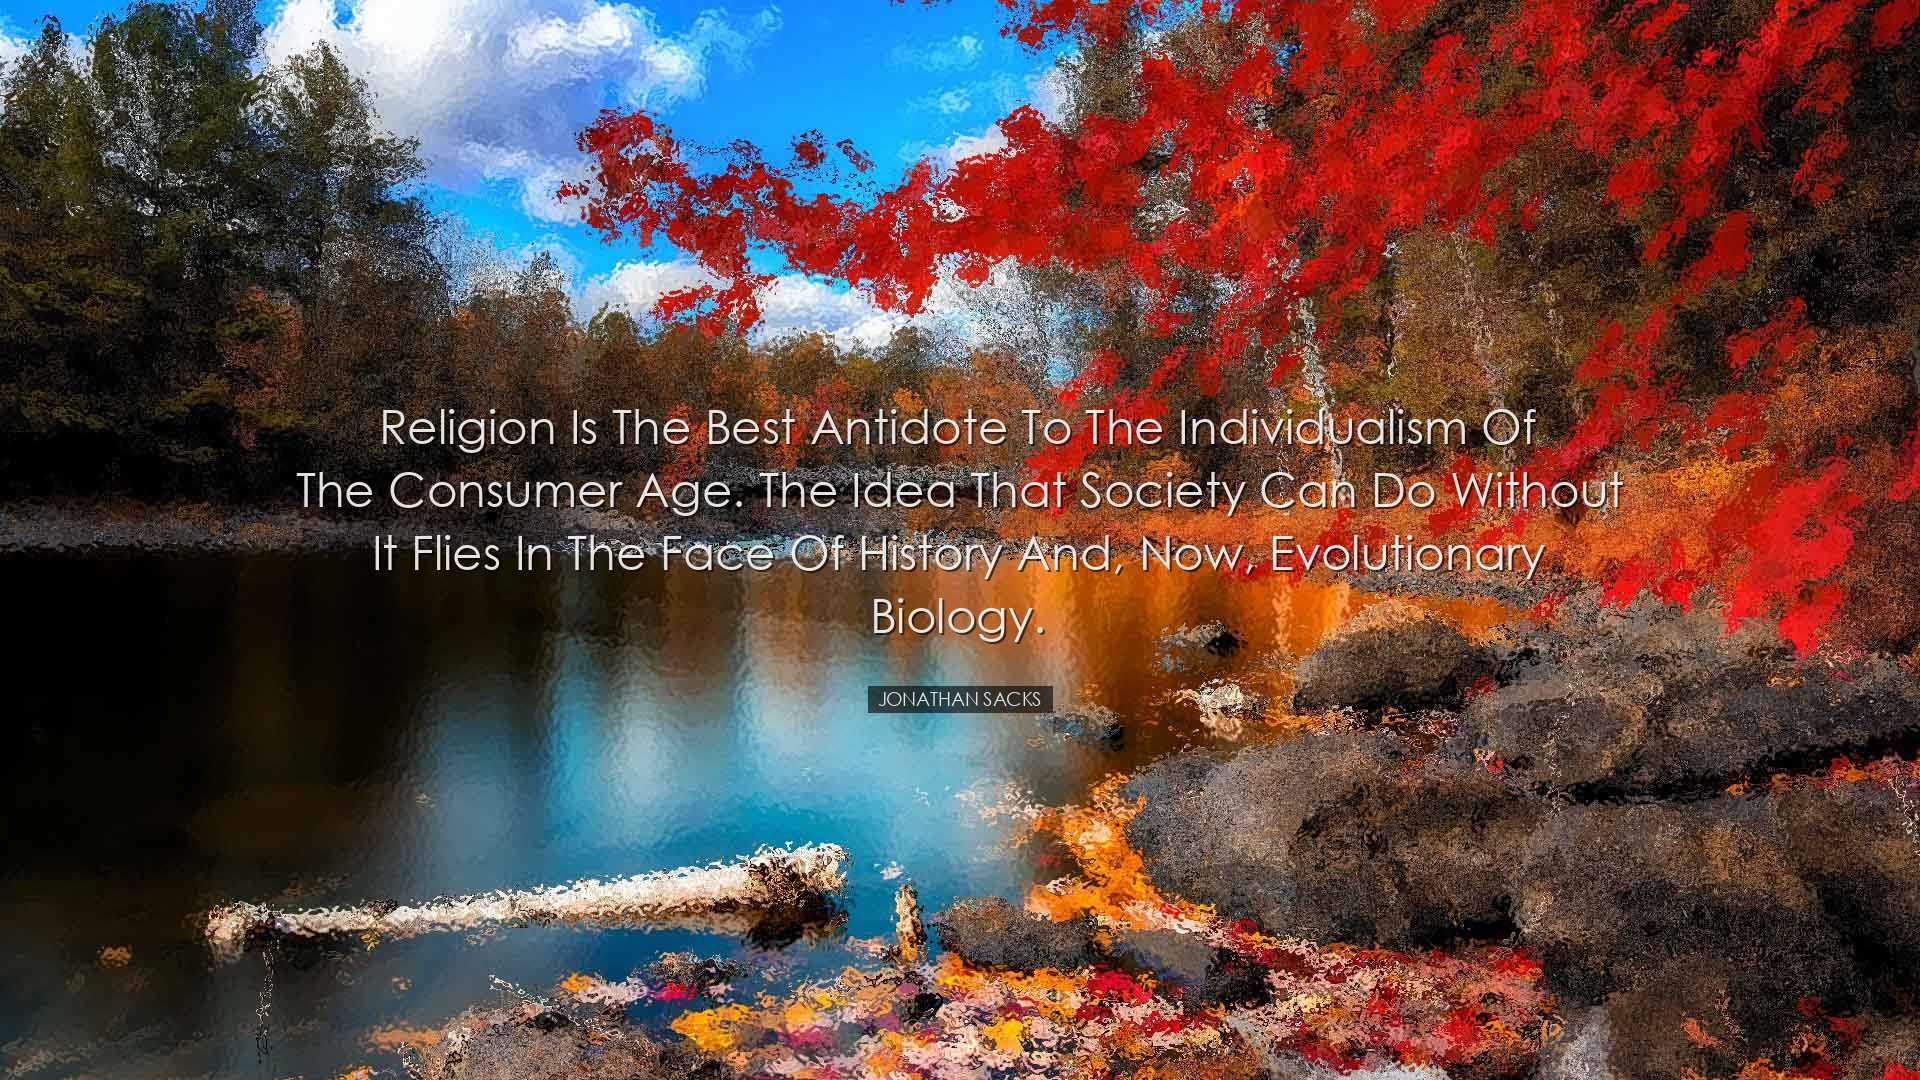 Religion is the best antidote to the individualism of the consumer